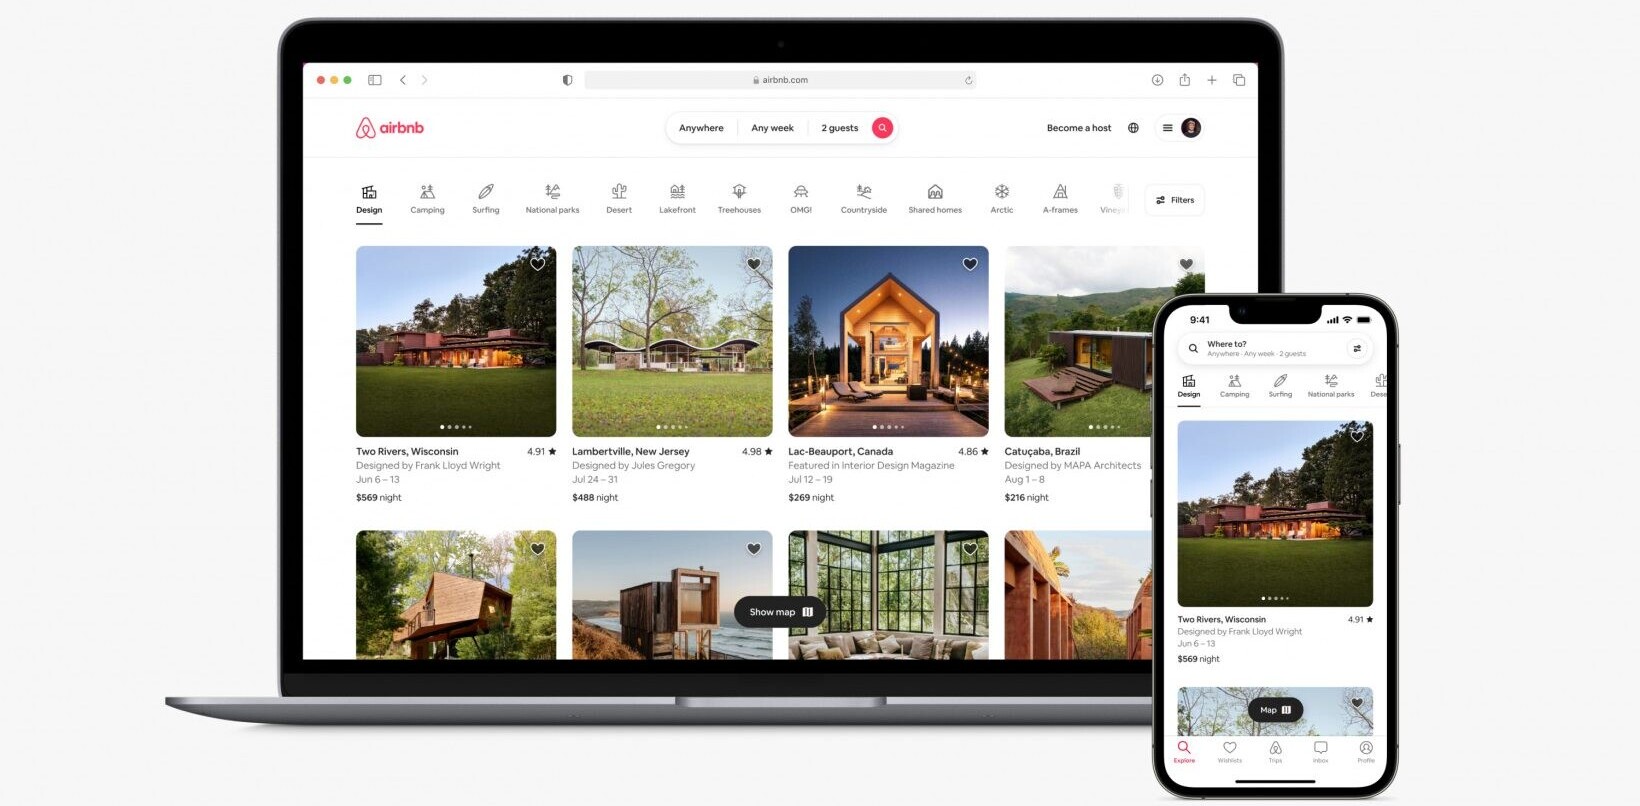 Airbnb is rolling out a new design to encourage travel discovery